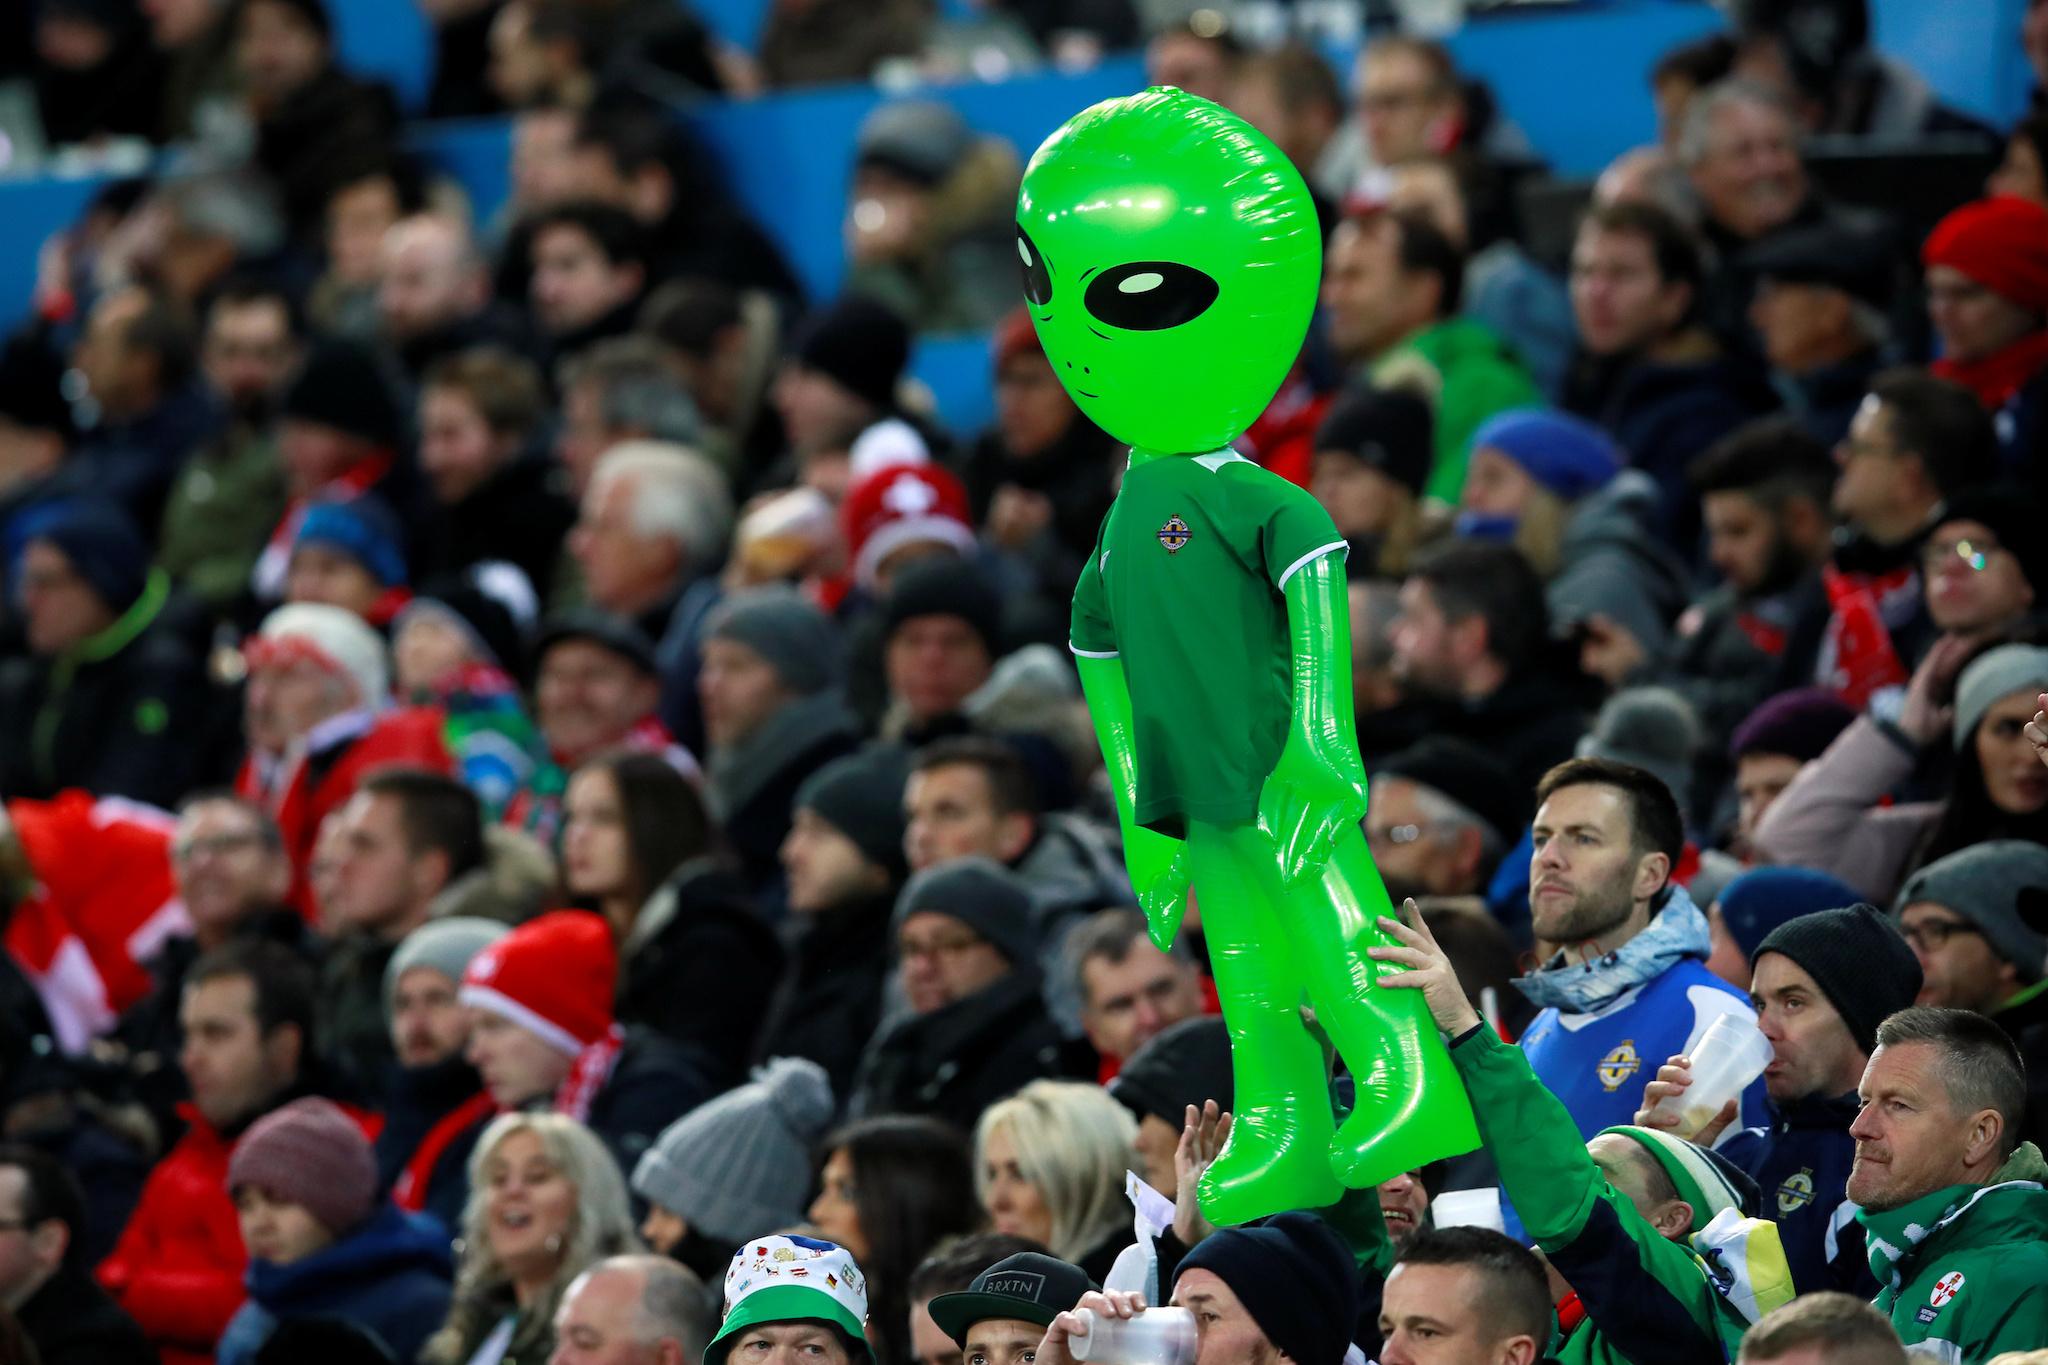 Northern Ireland fans hold up an inflatable alien during a game against Switzerland